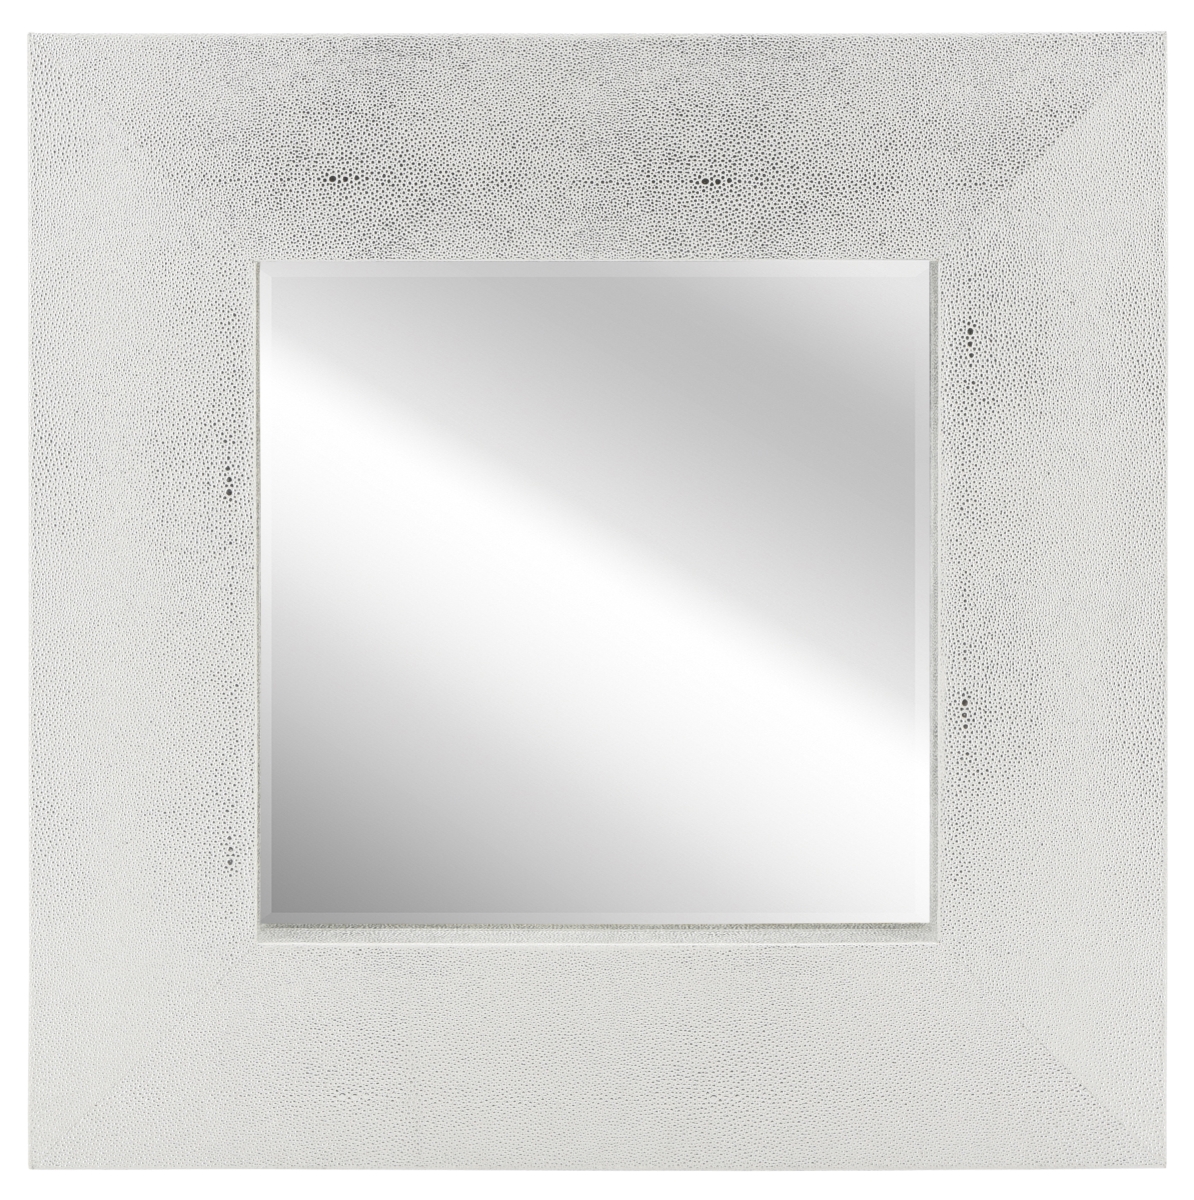 Elm-3030-01sw 30 X 30 In. Silver On White Metallic Shagreen Leather Framed Occasional Beveled Mirror